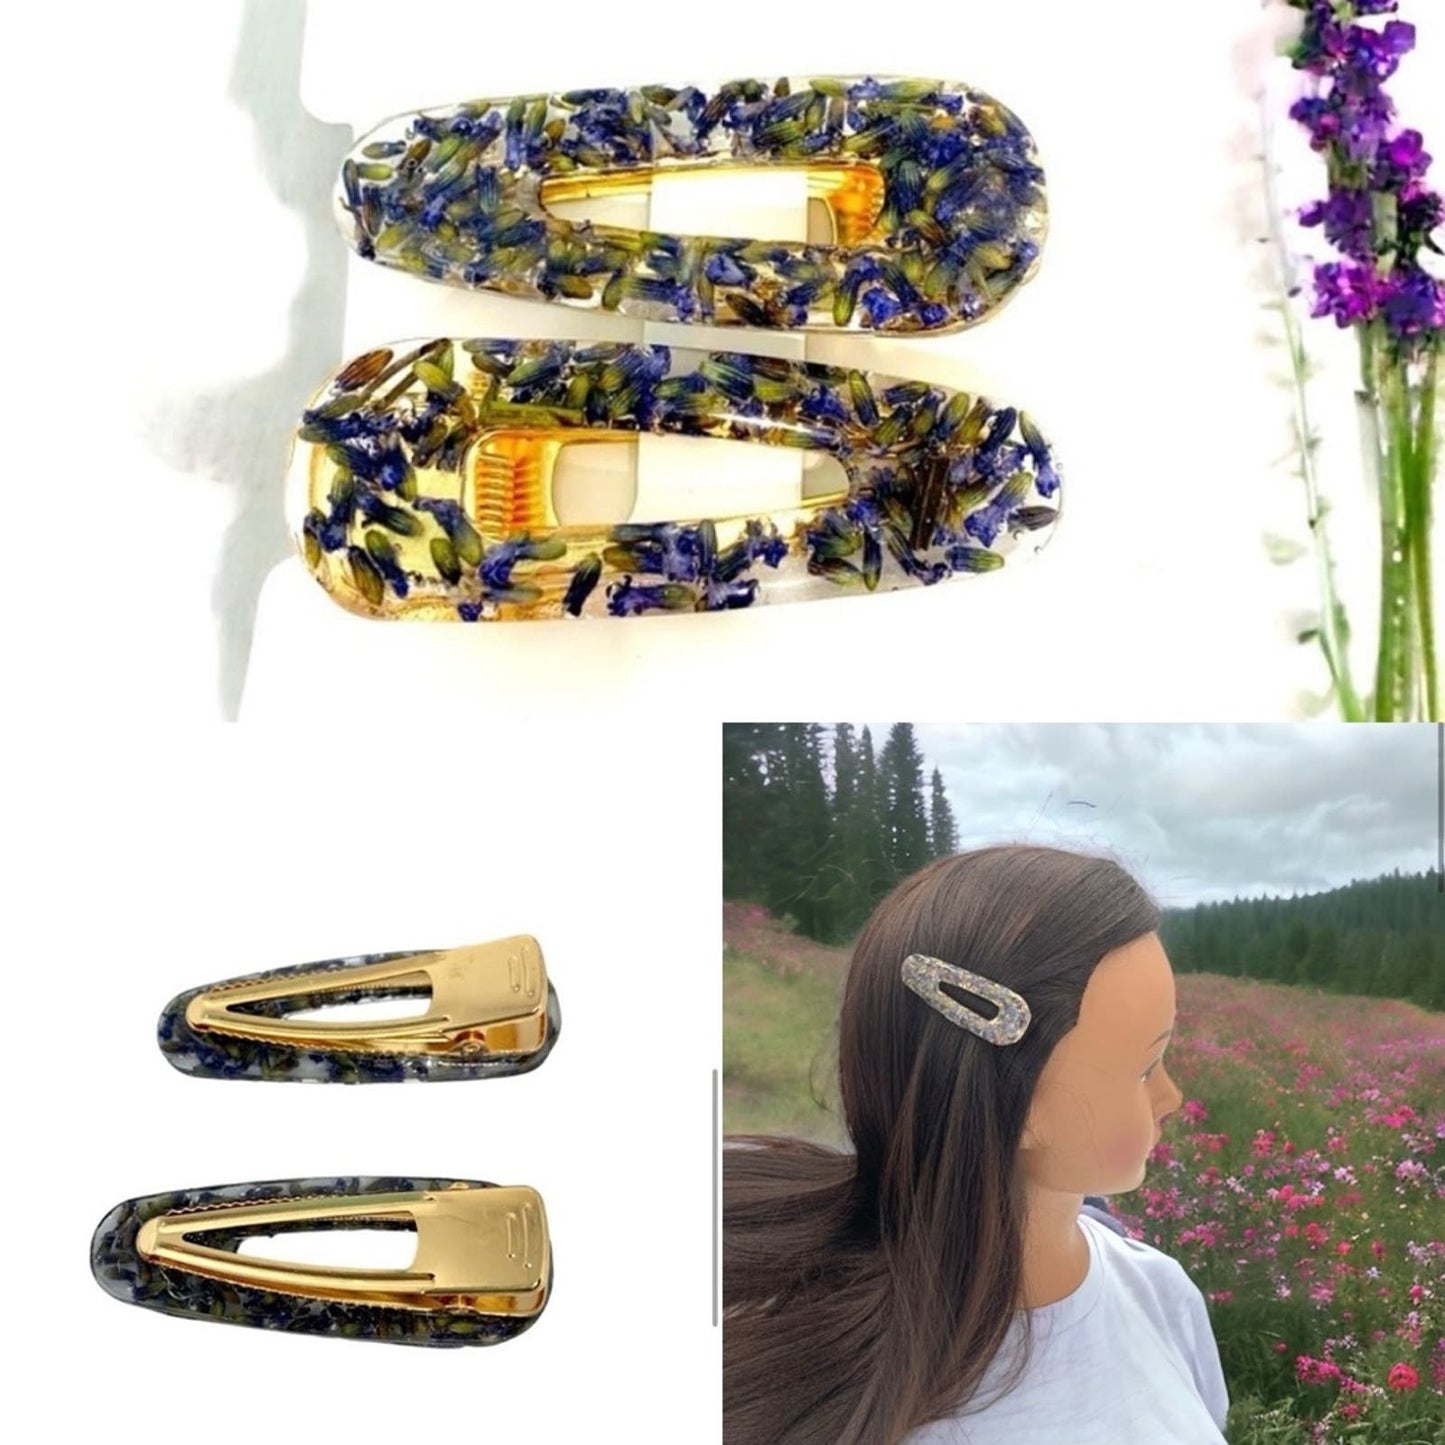 Handcrafted Hair Barrettes Four Sets of Artisan Hair Accessories Resin Floral Bridal